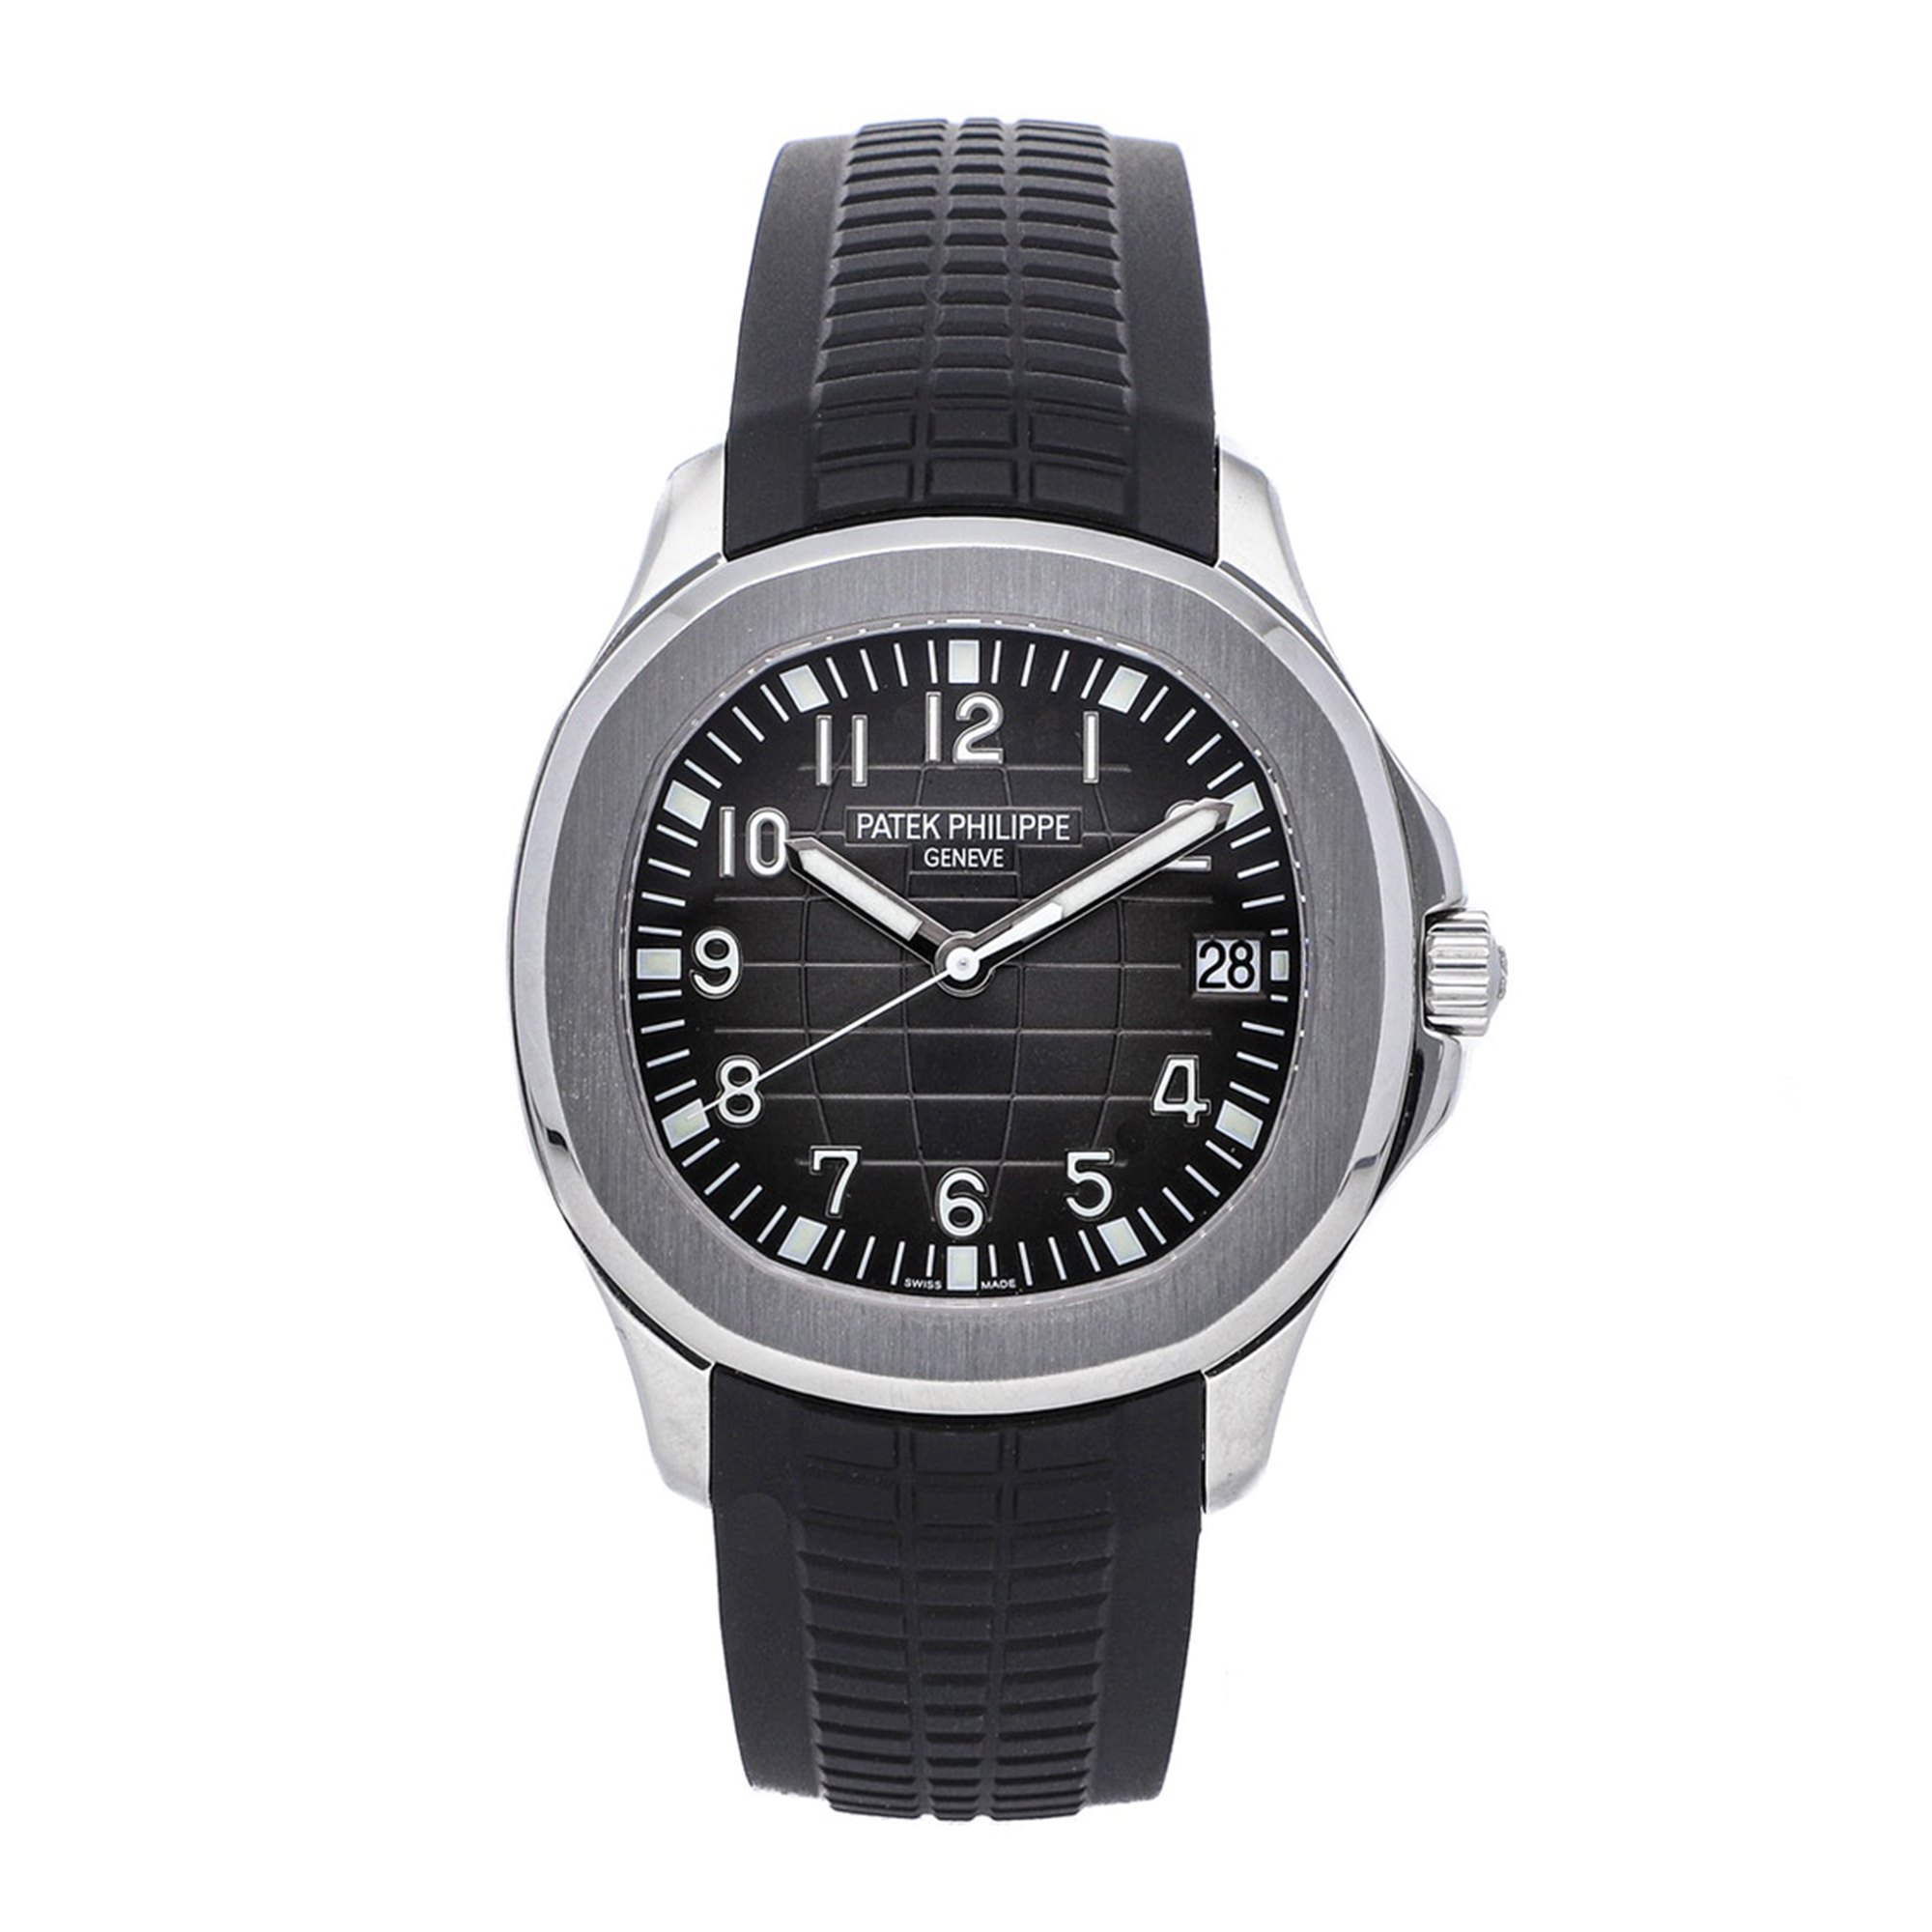 Patek Philippe Aquanaut 5167a 001 19 Ato W Second Hand Watches